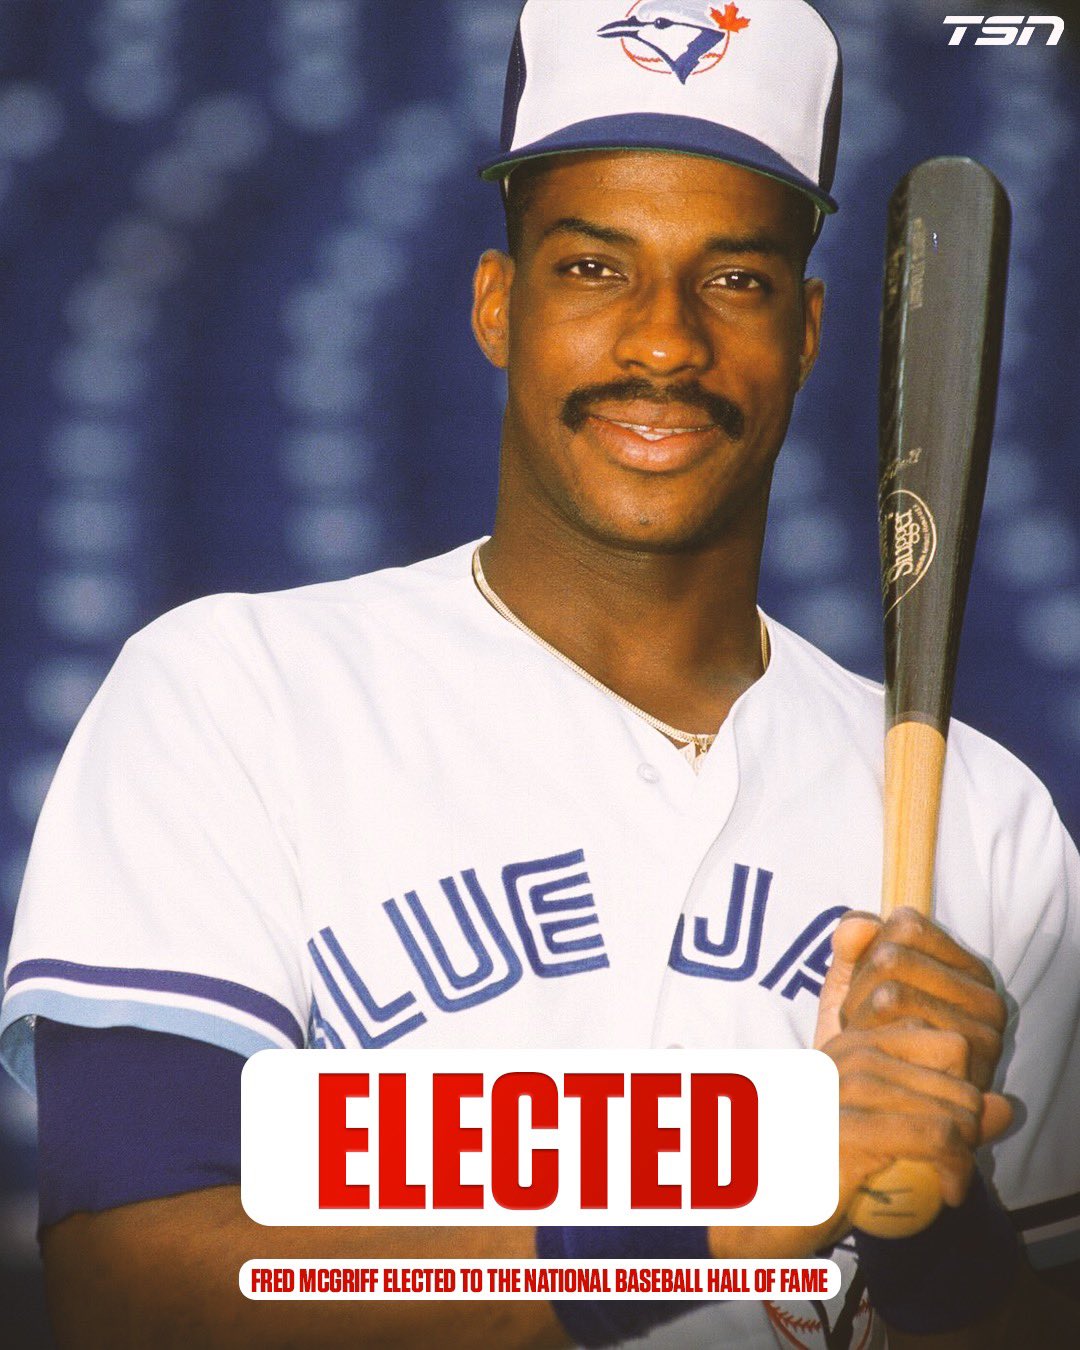 TSN on Twitter: Fred McGriff has been elected to the National